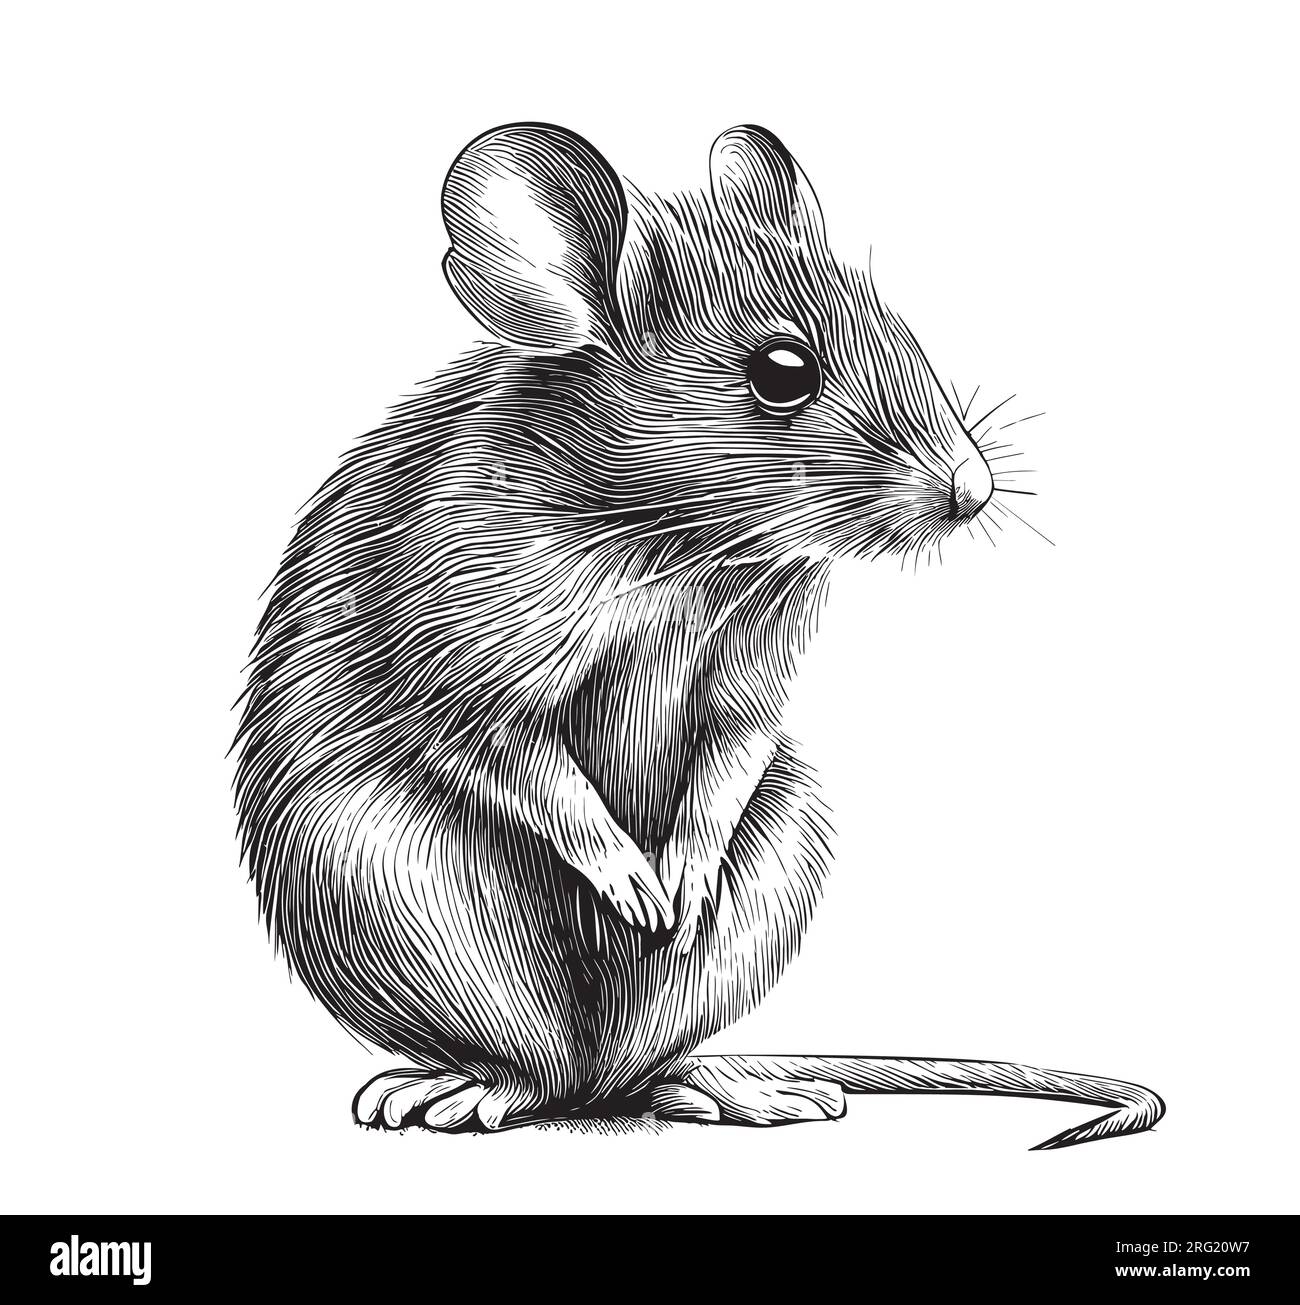 Mouse drawing face Royalty Free Vector Image - VectorStock